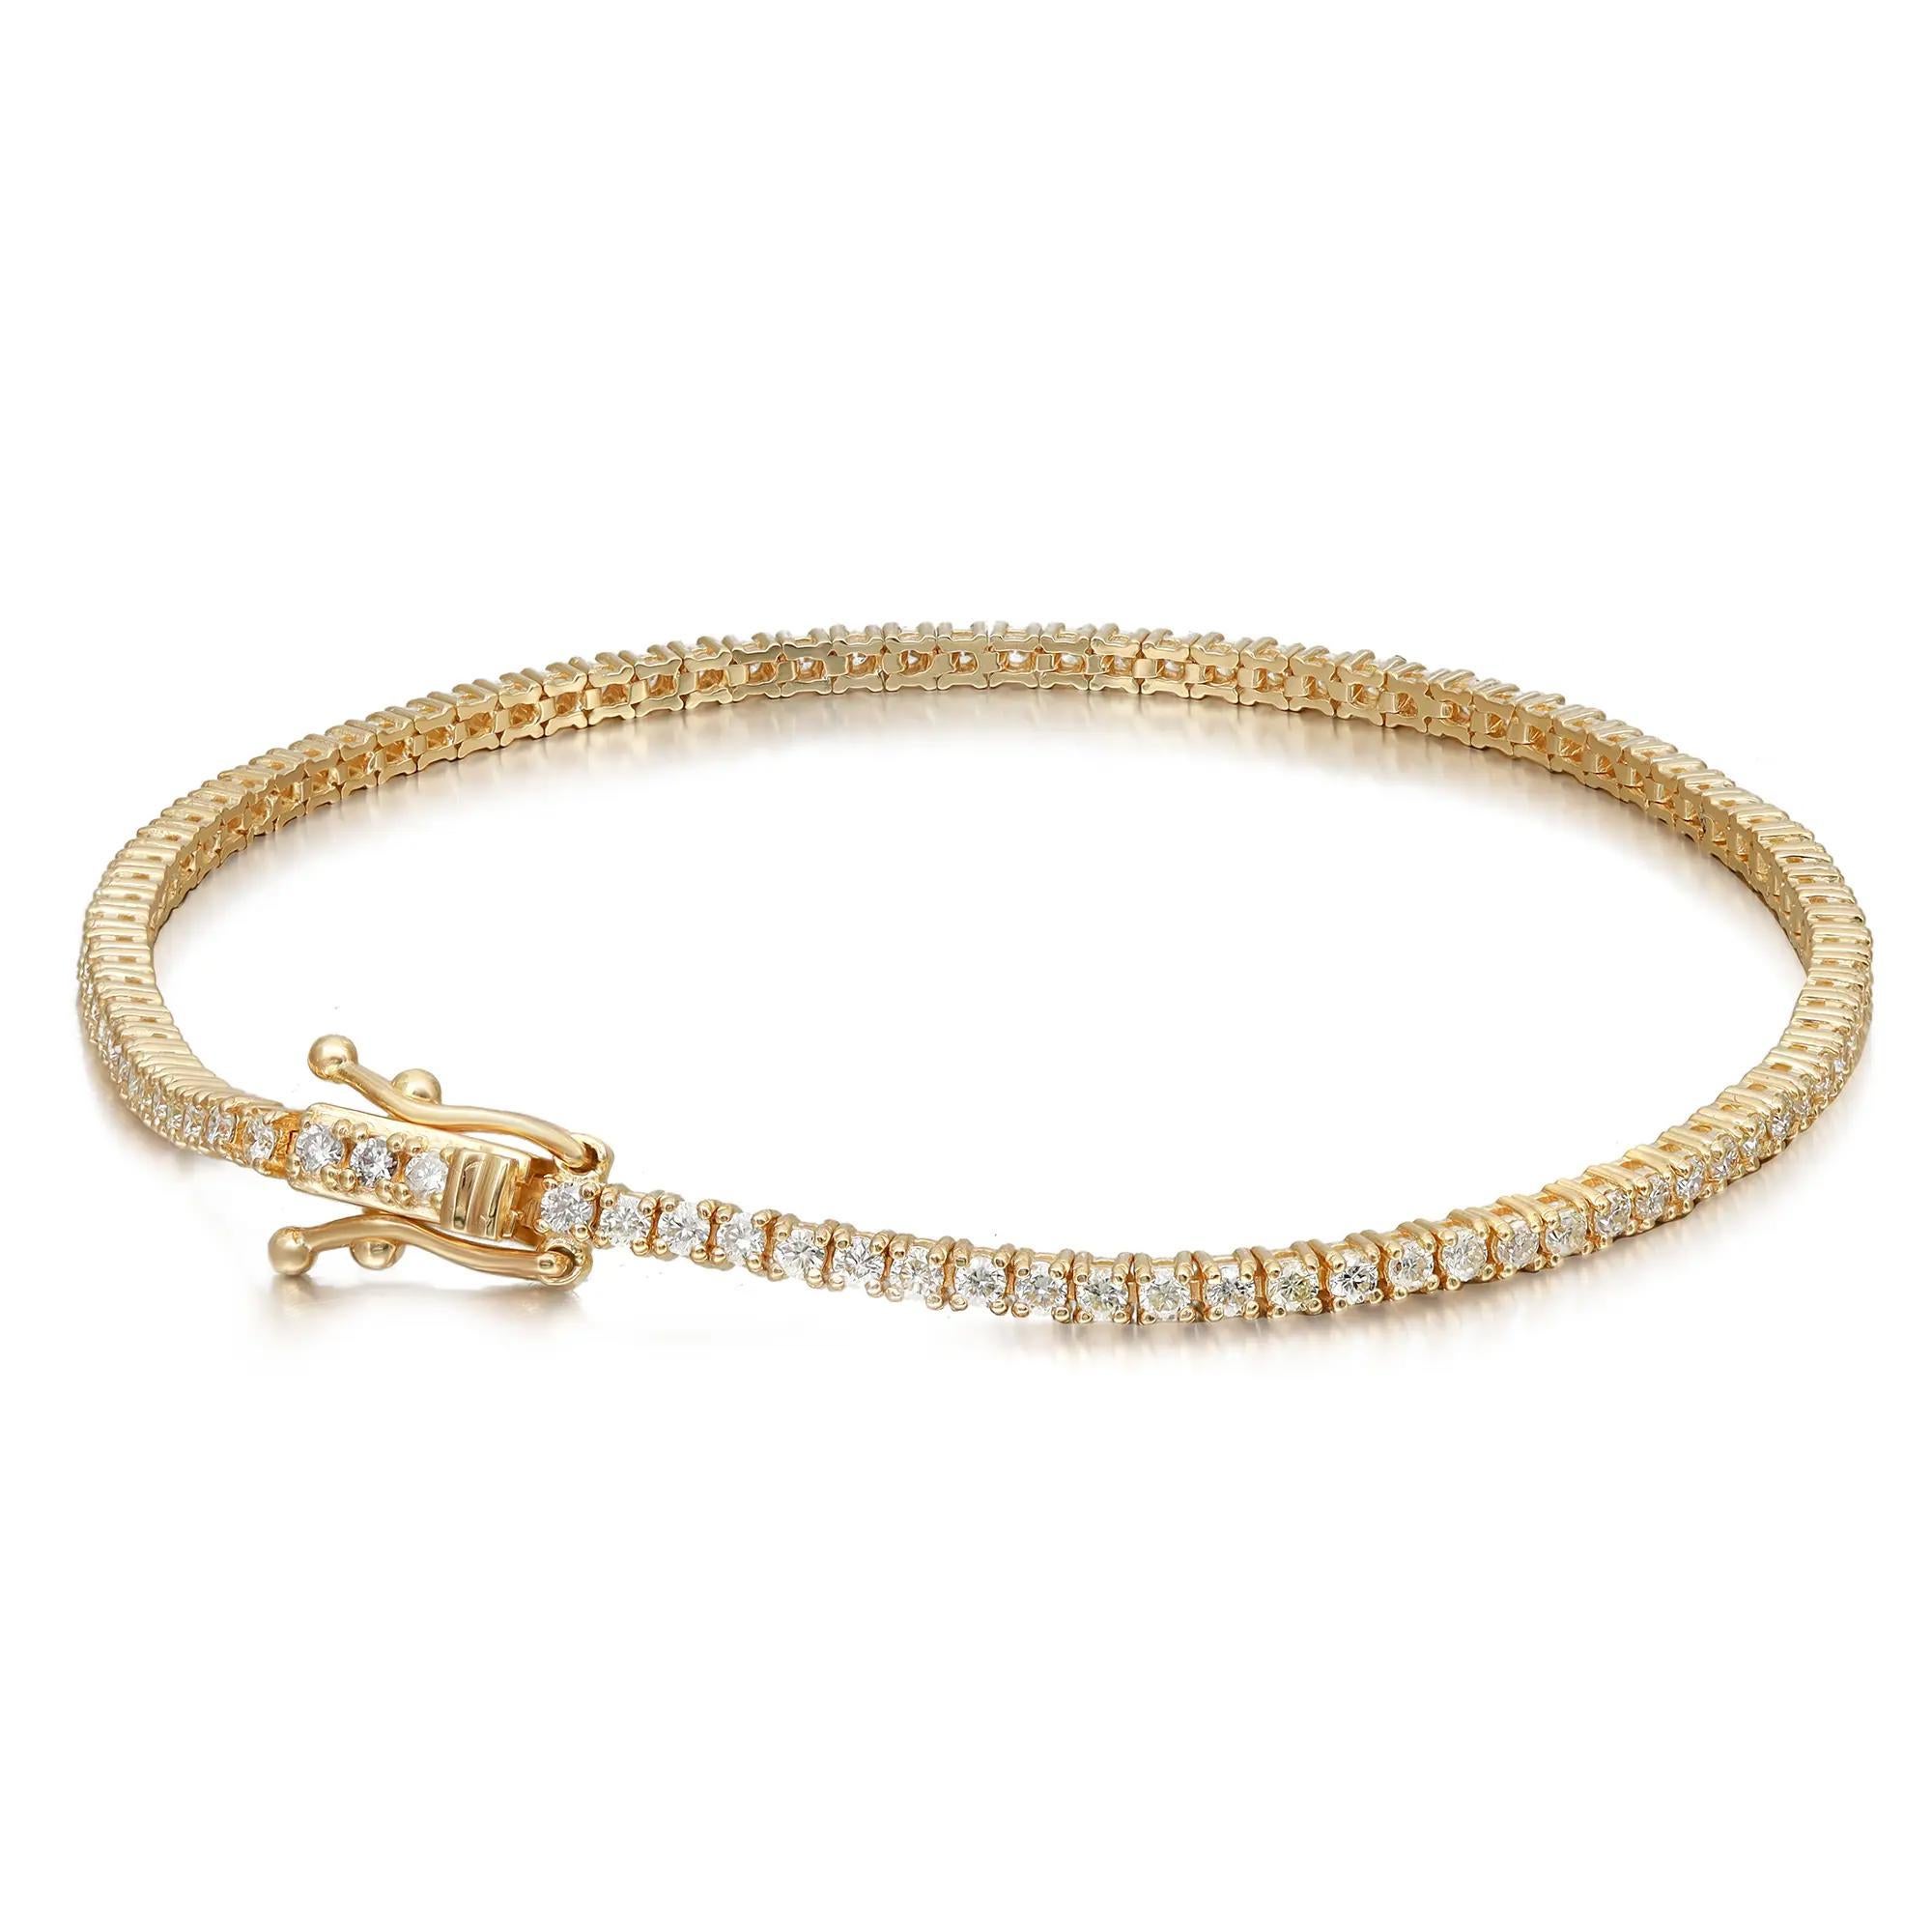 Round Cut Prong Set Round Diamond Tennis Bracelet 14K Yellow Gold 0.95Cttw 7 Inches For Sale